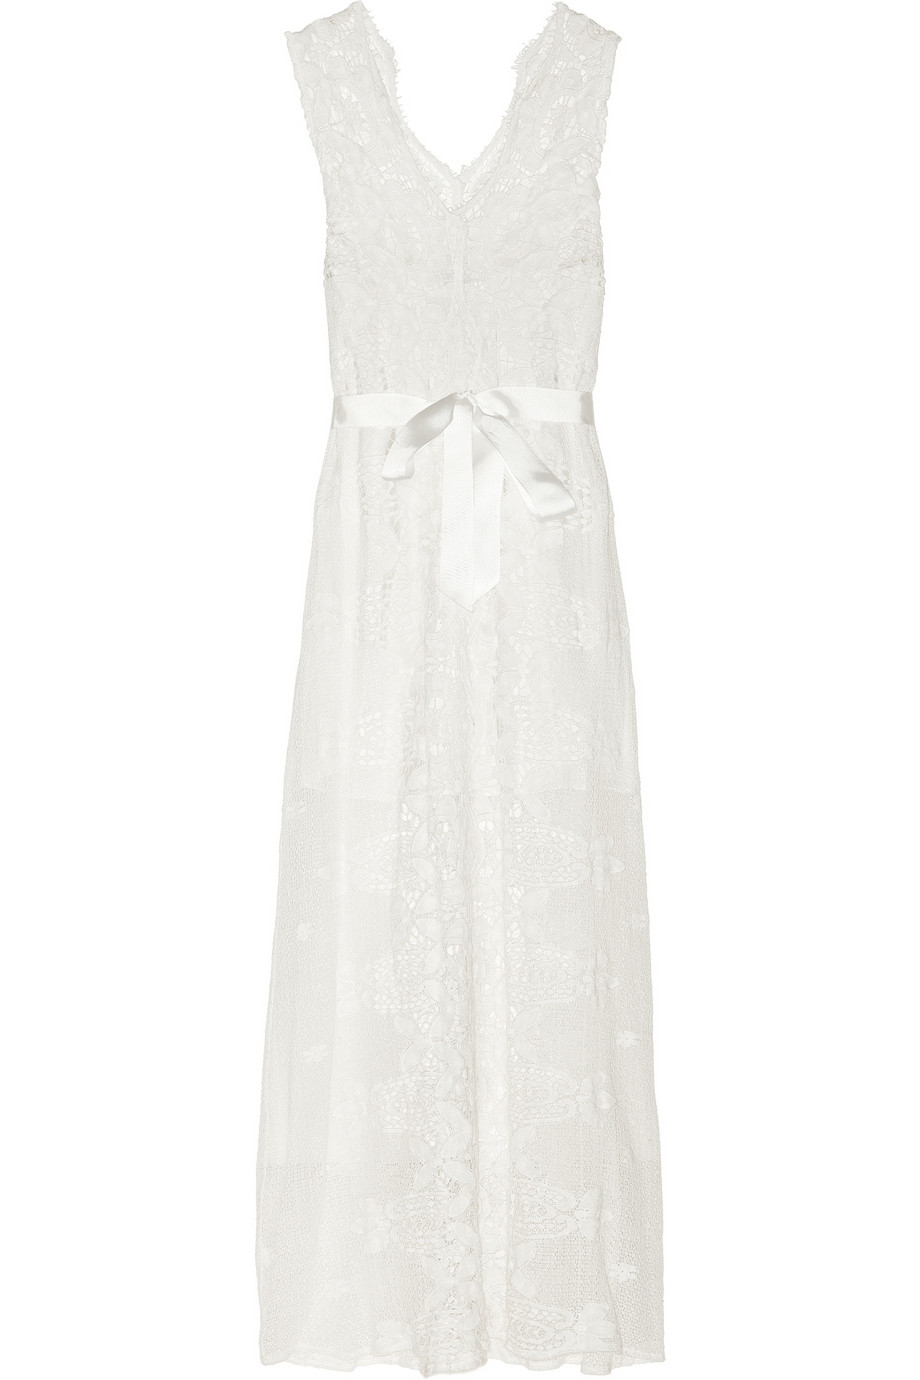 Lyst - Miguelina Eve Crocheted-Lace Maxi Dress in White